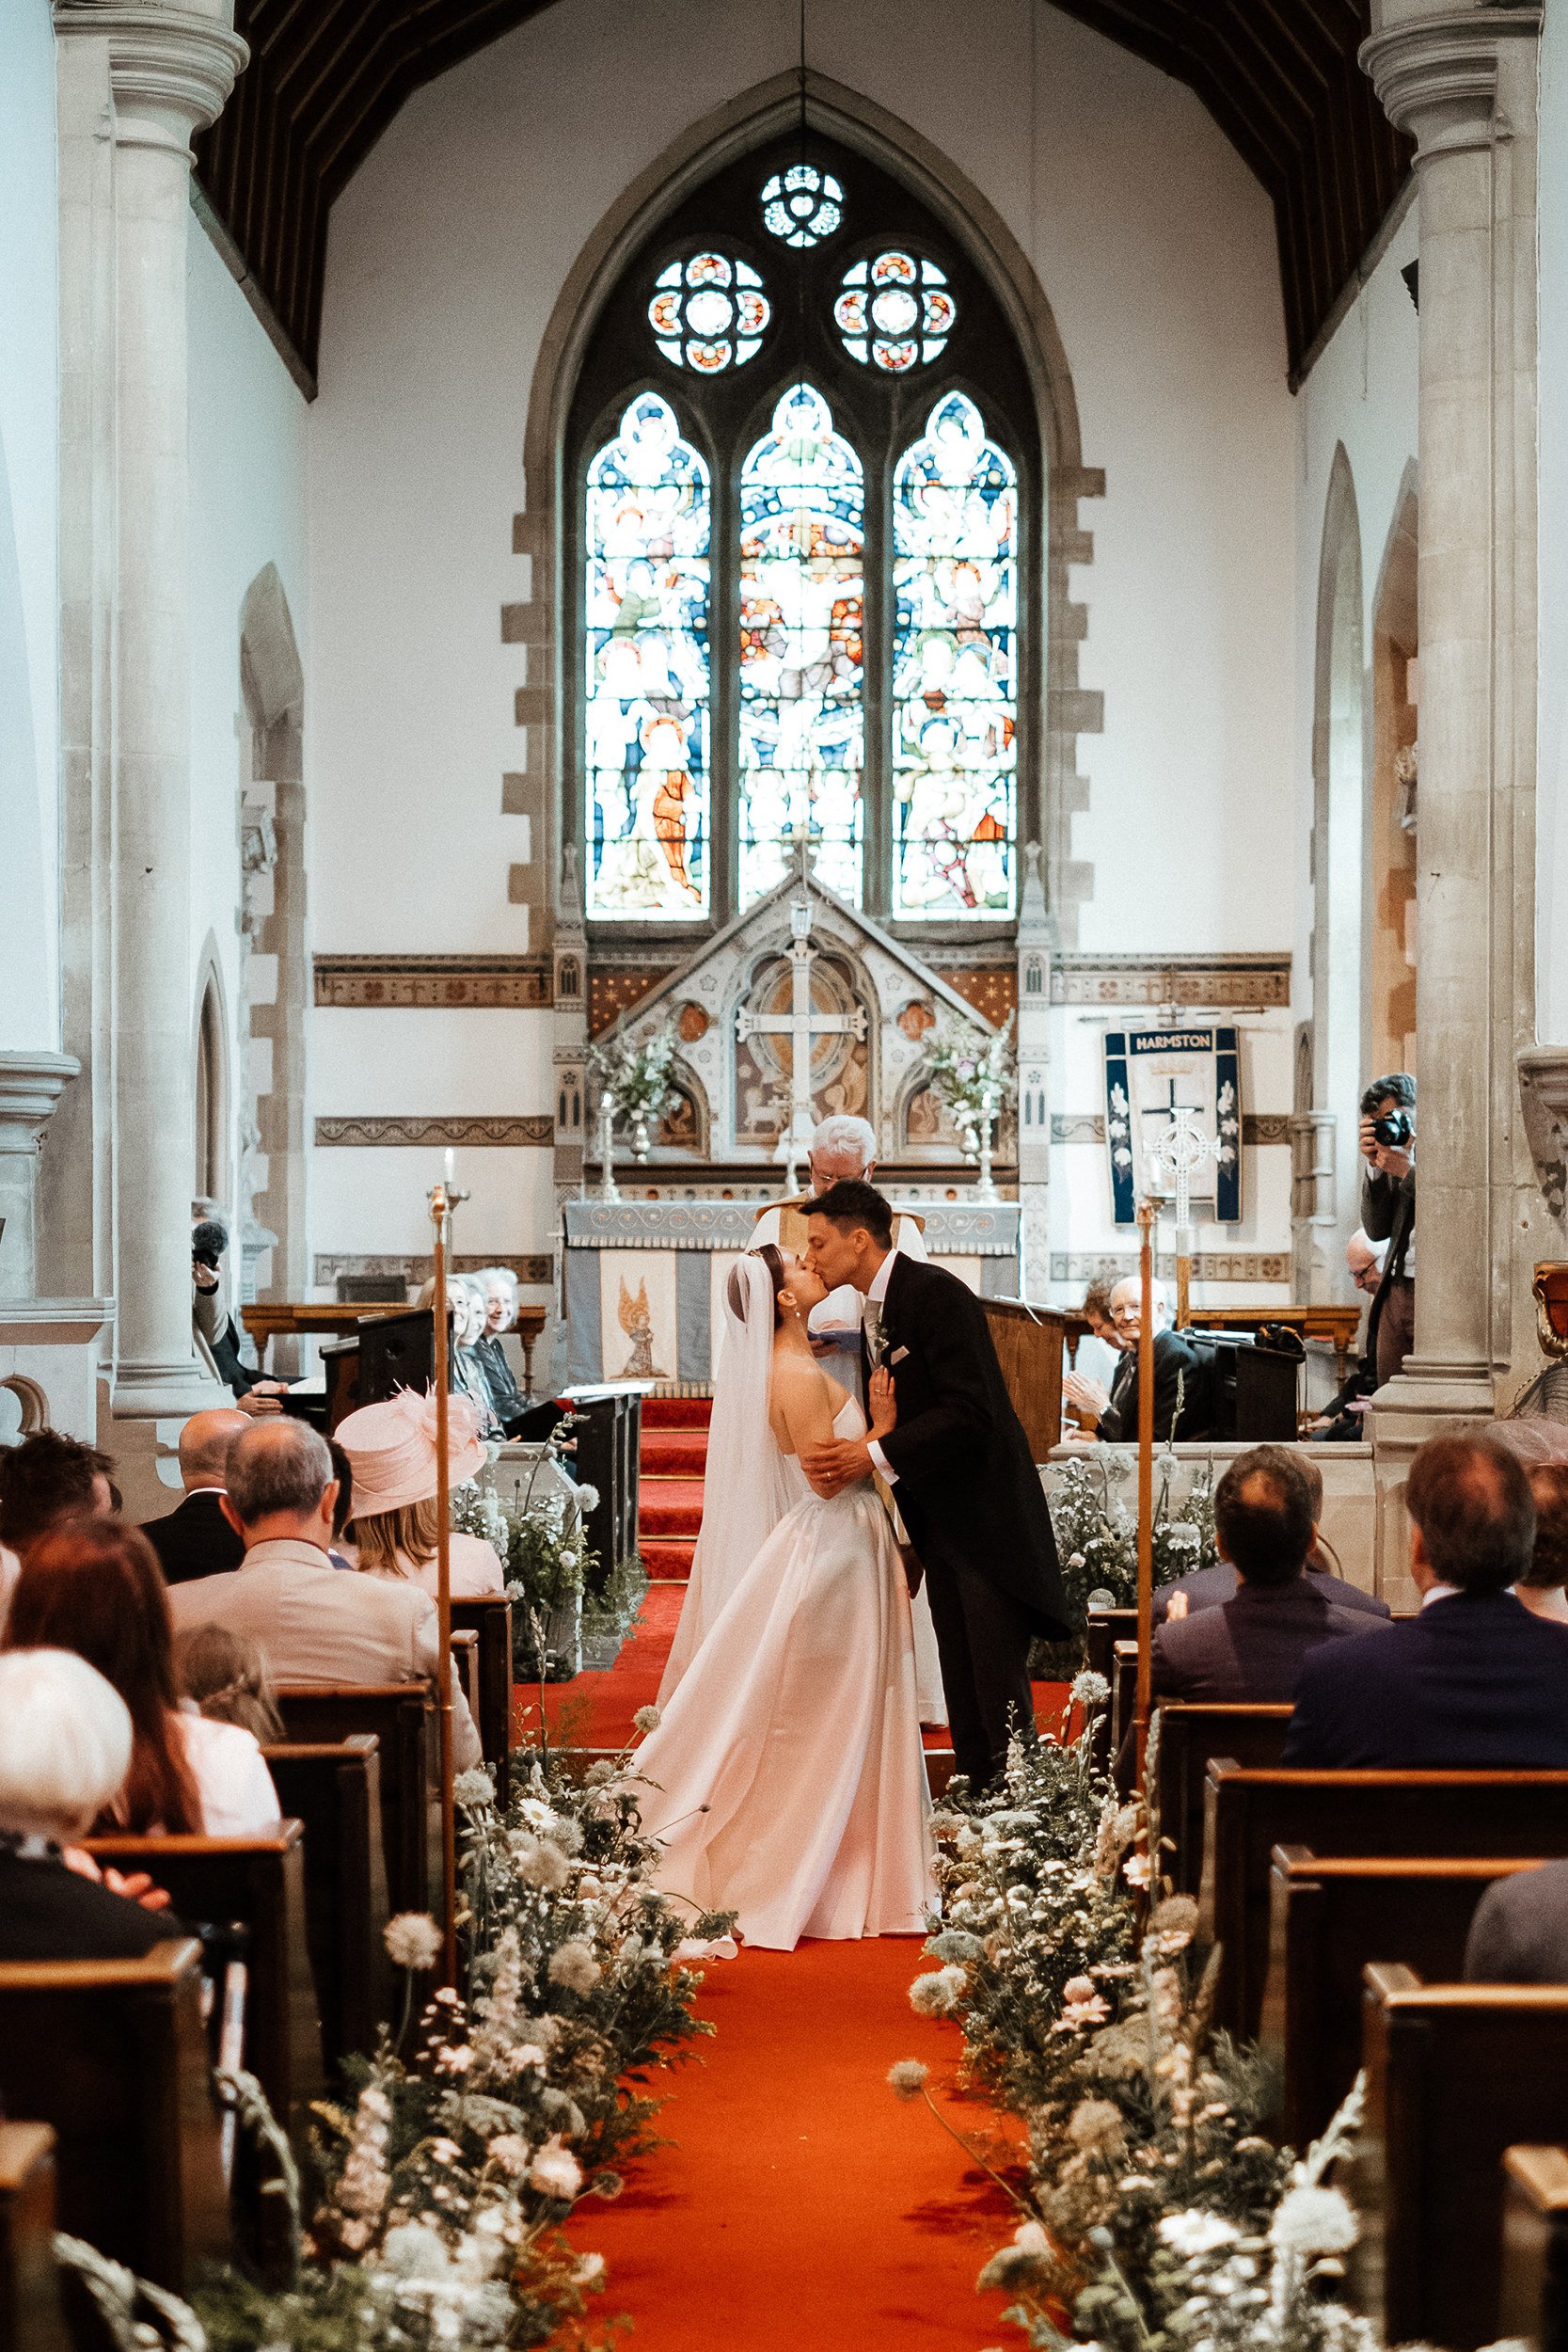 Beautiful bride India wore a wedding dress by Halfpenny London